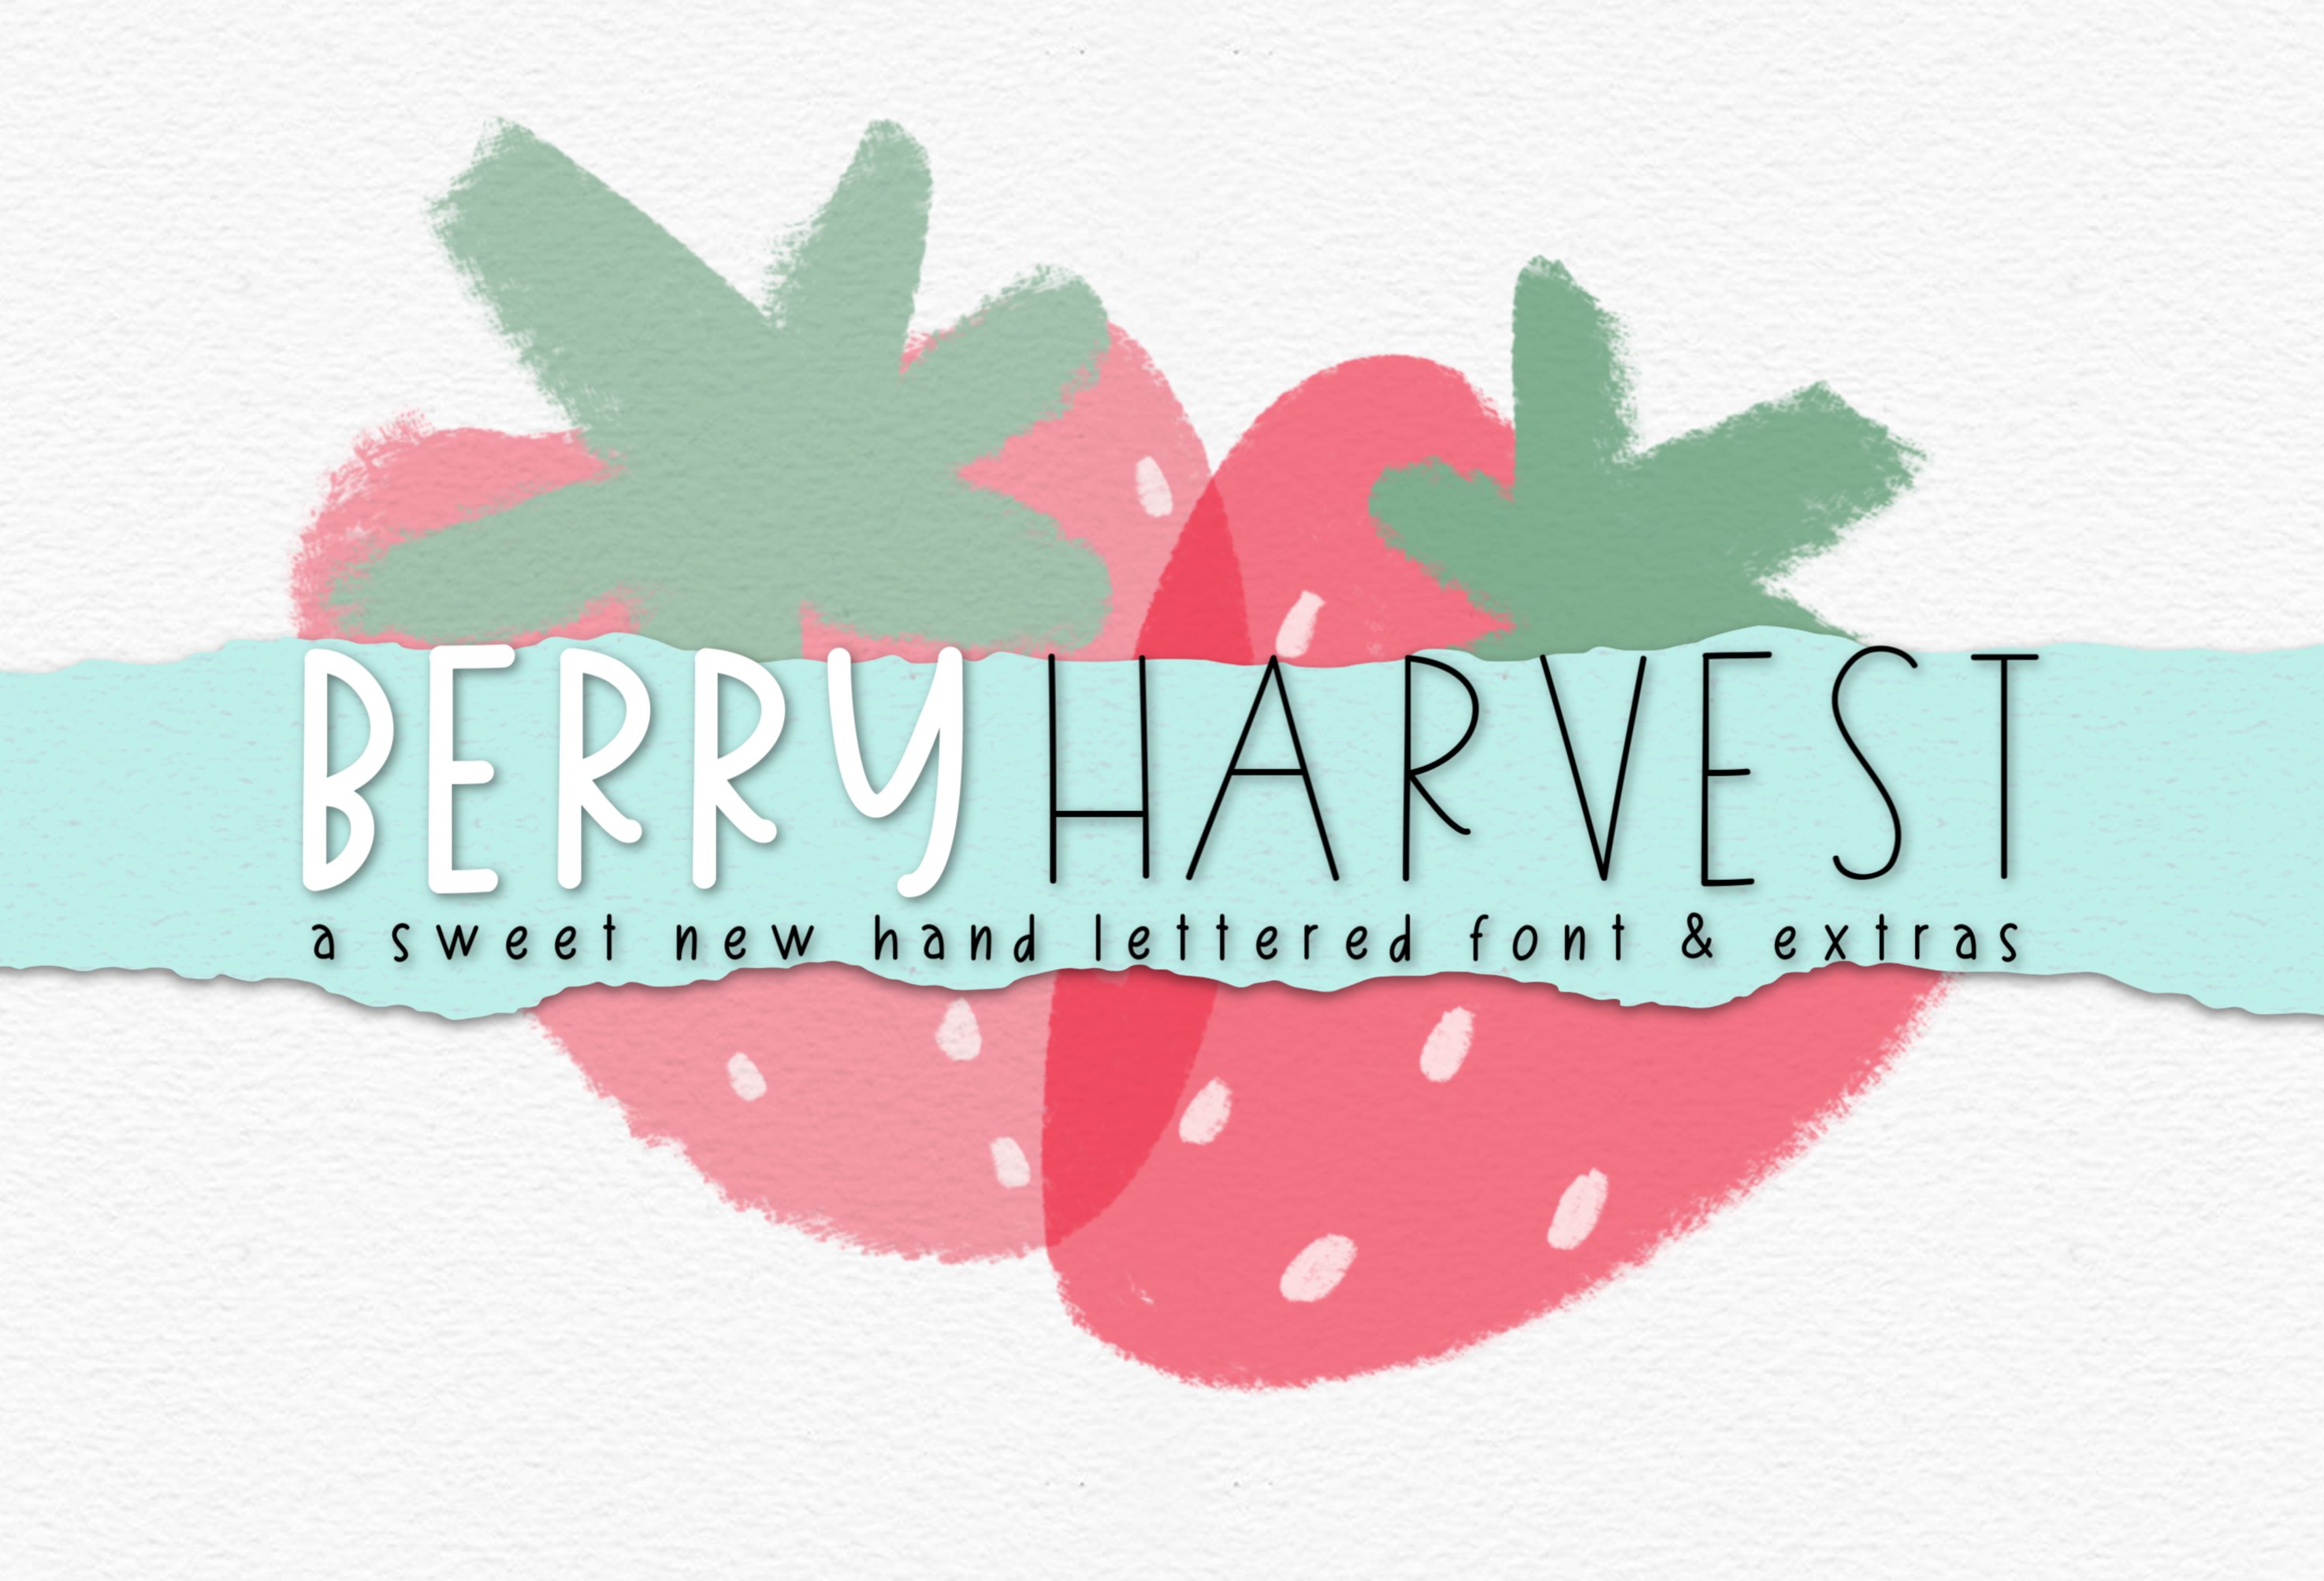 Berry Harvest Font & Extras cover image.